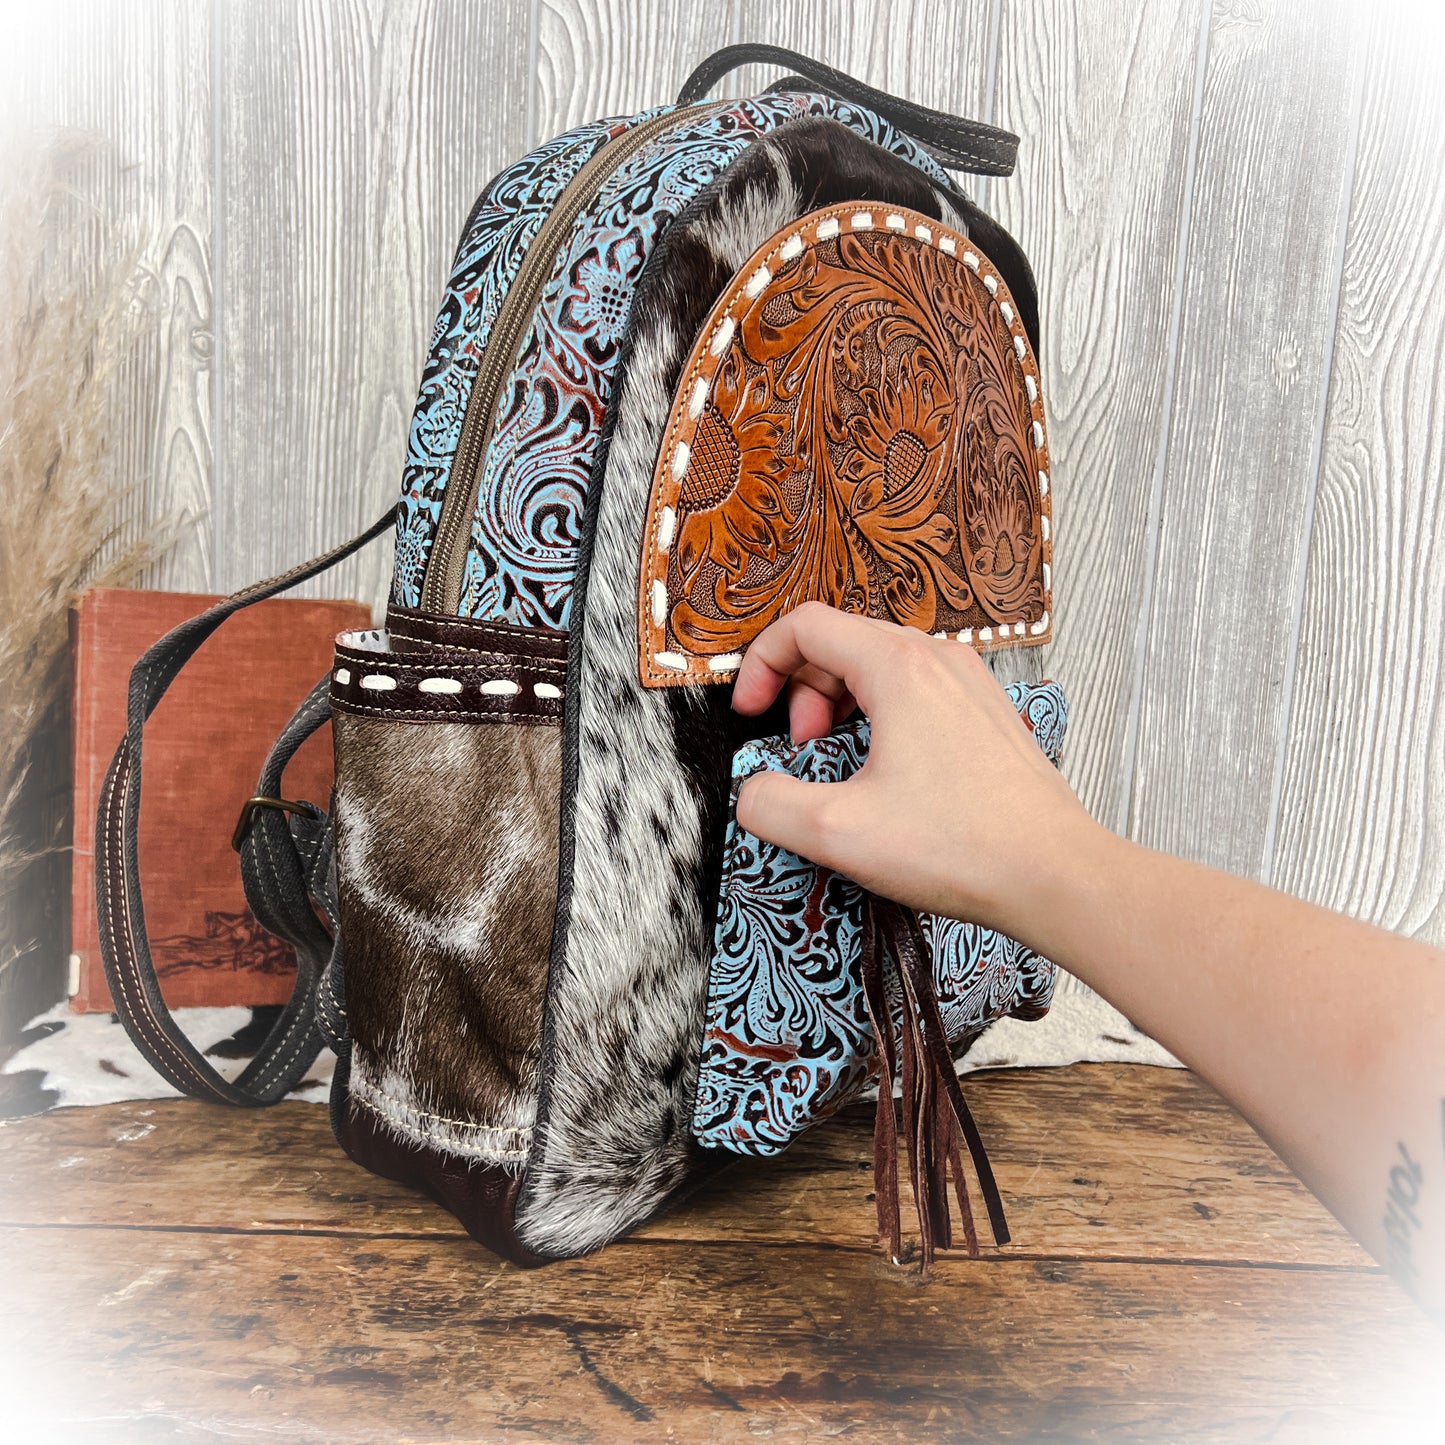 Chisum Draw Backpack